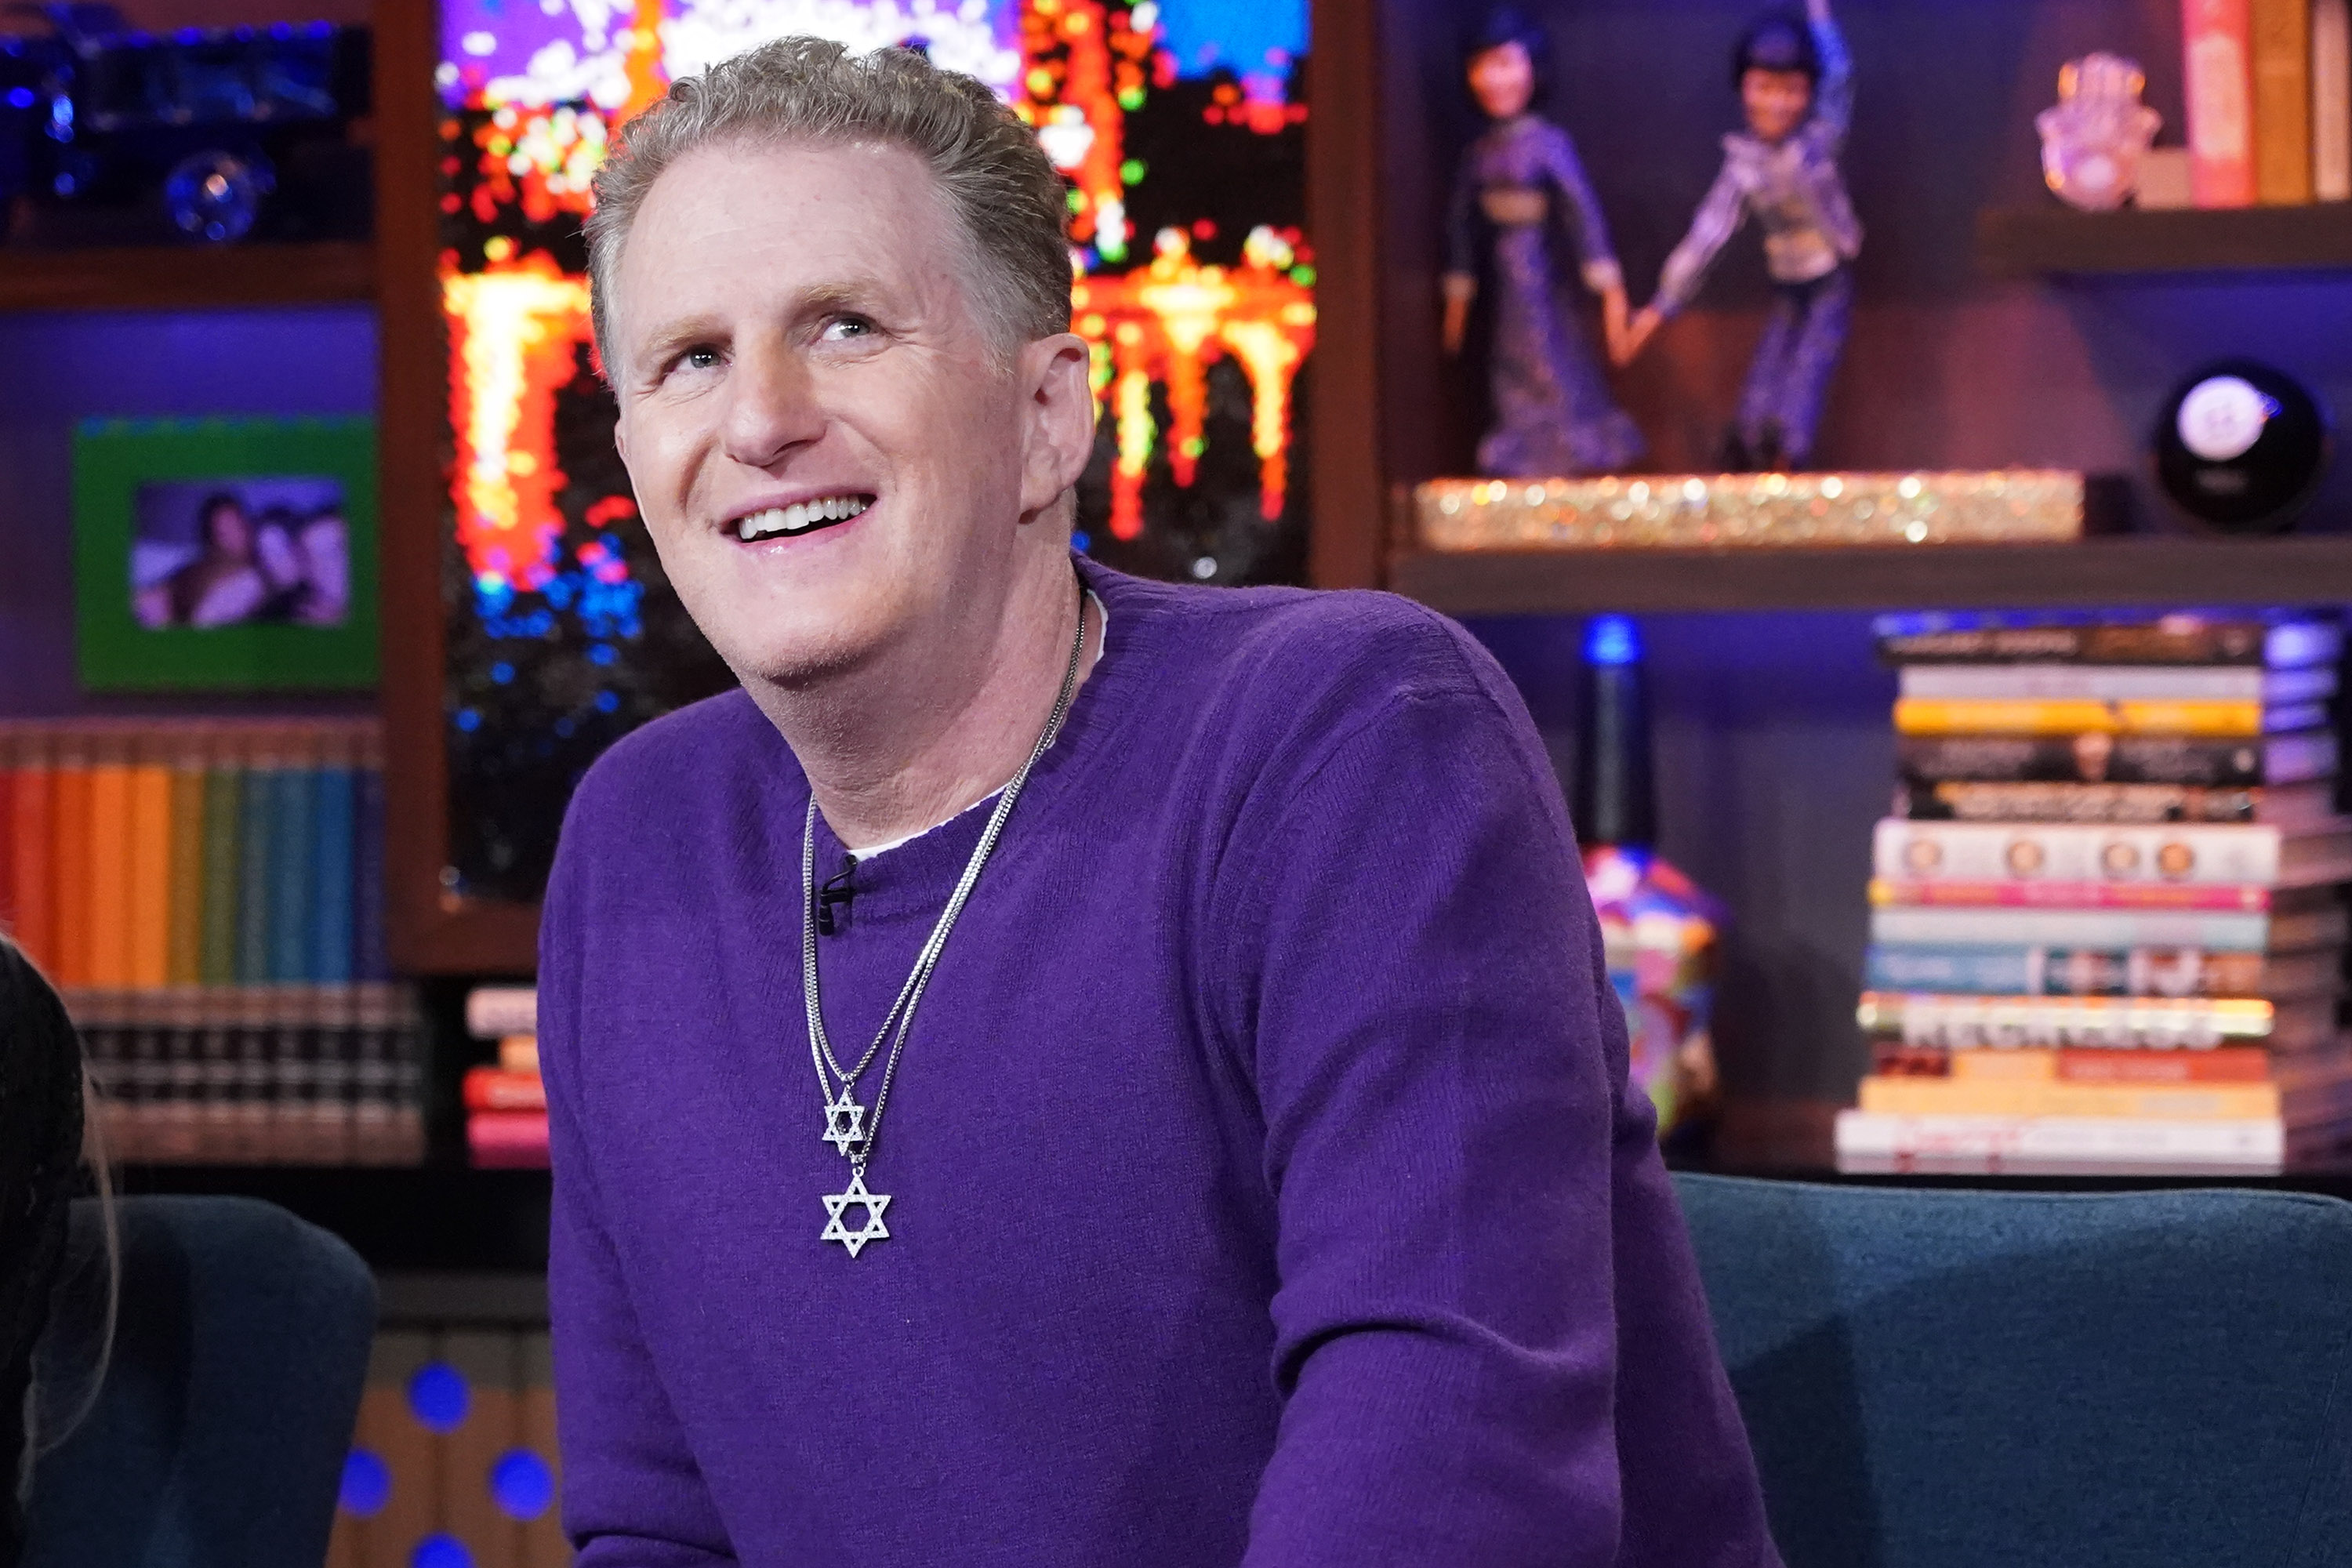 Michael Rapaport on the set of 'Watch What Happens Live' smiling, looking up, and wearing a purple jumper